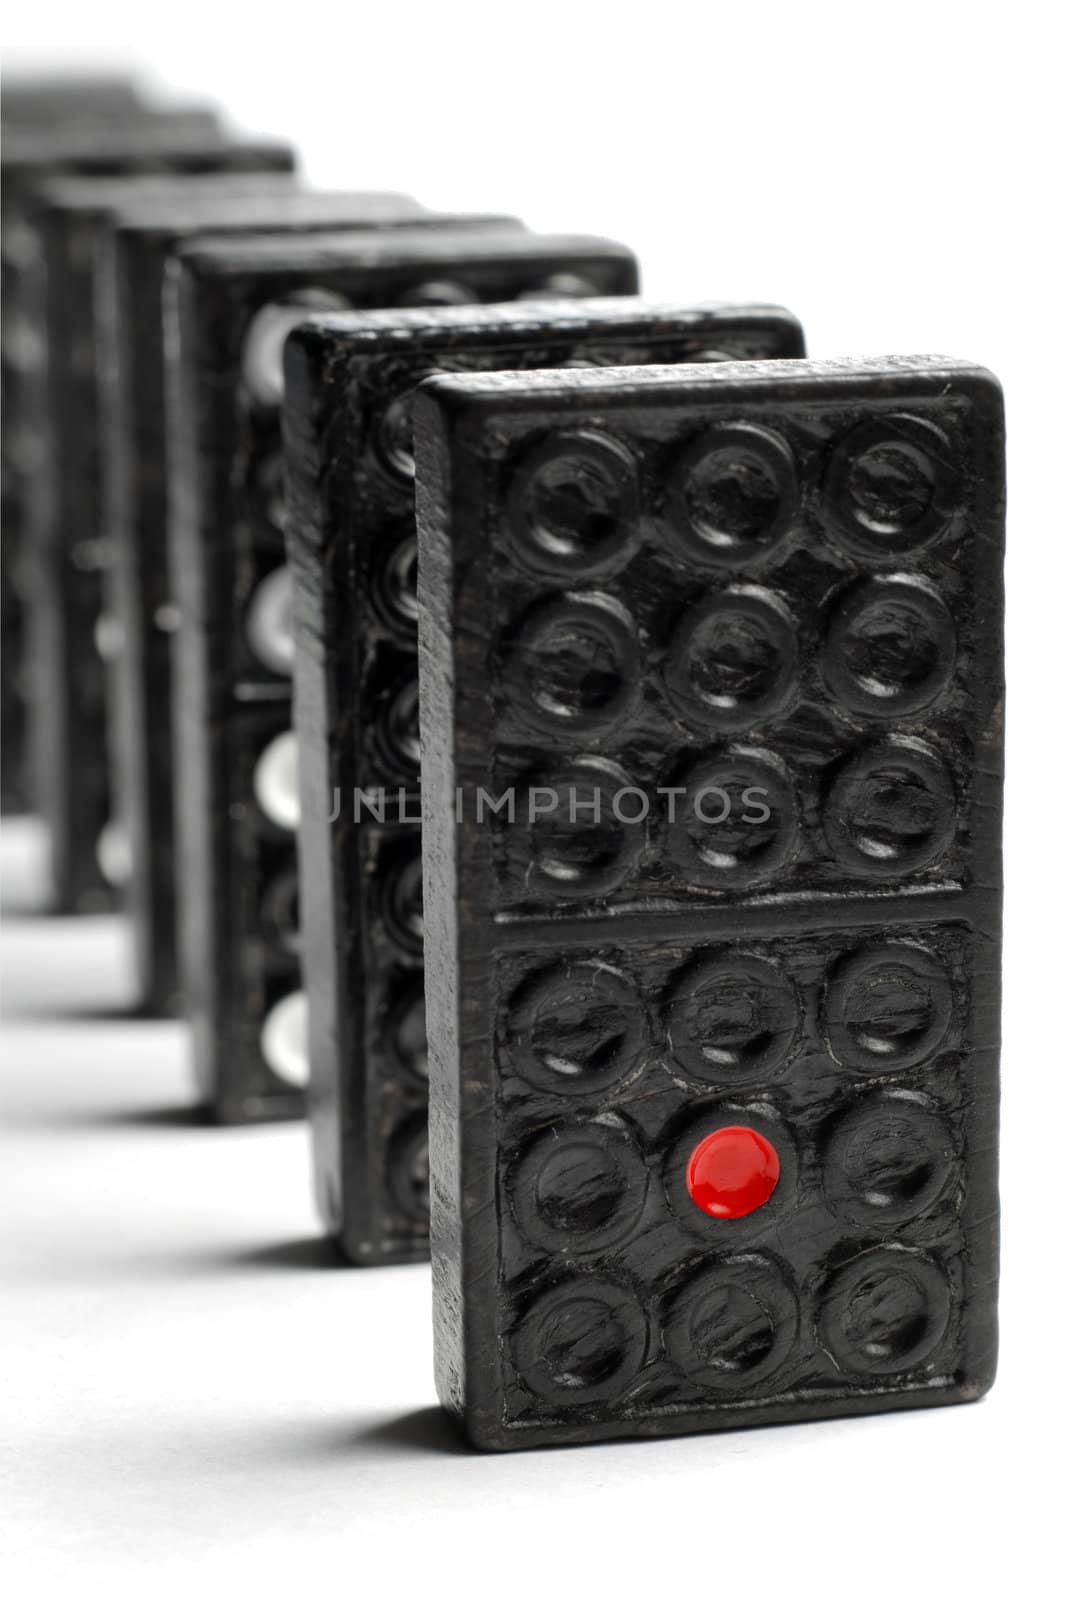 Line of domino blocks isolated on white background